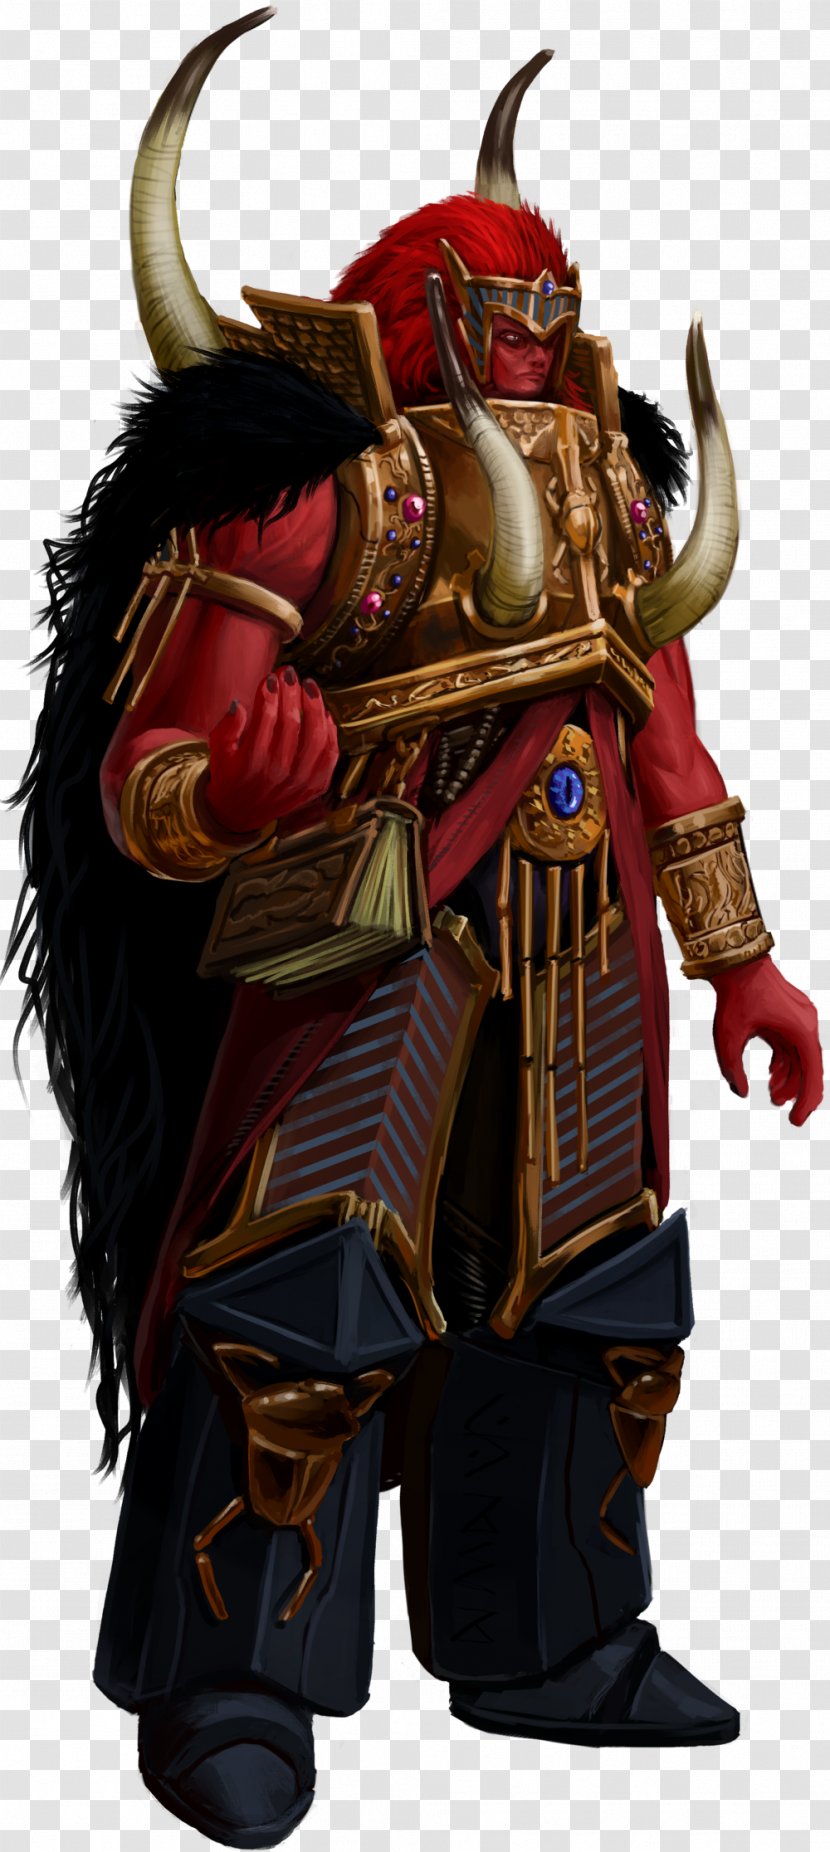 Warhammer 40,000 Fantasy Battle Primarch Chaos Space Marines - Gods Of The Old World - Though Transparent PNG